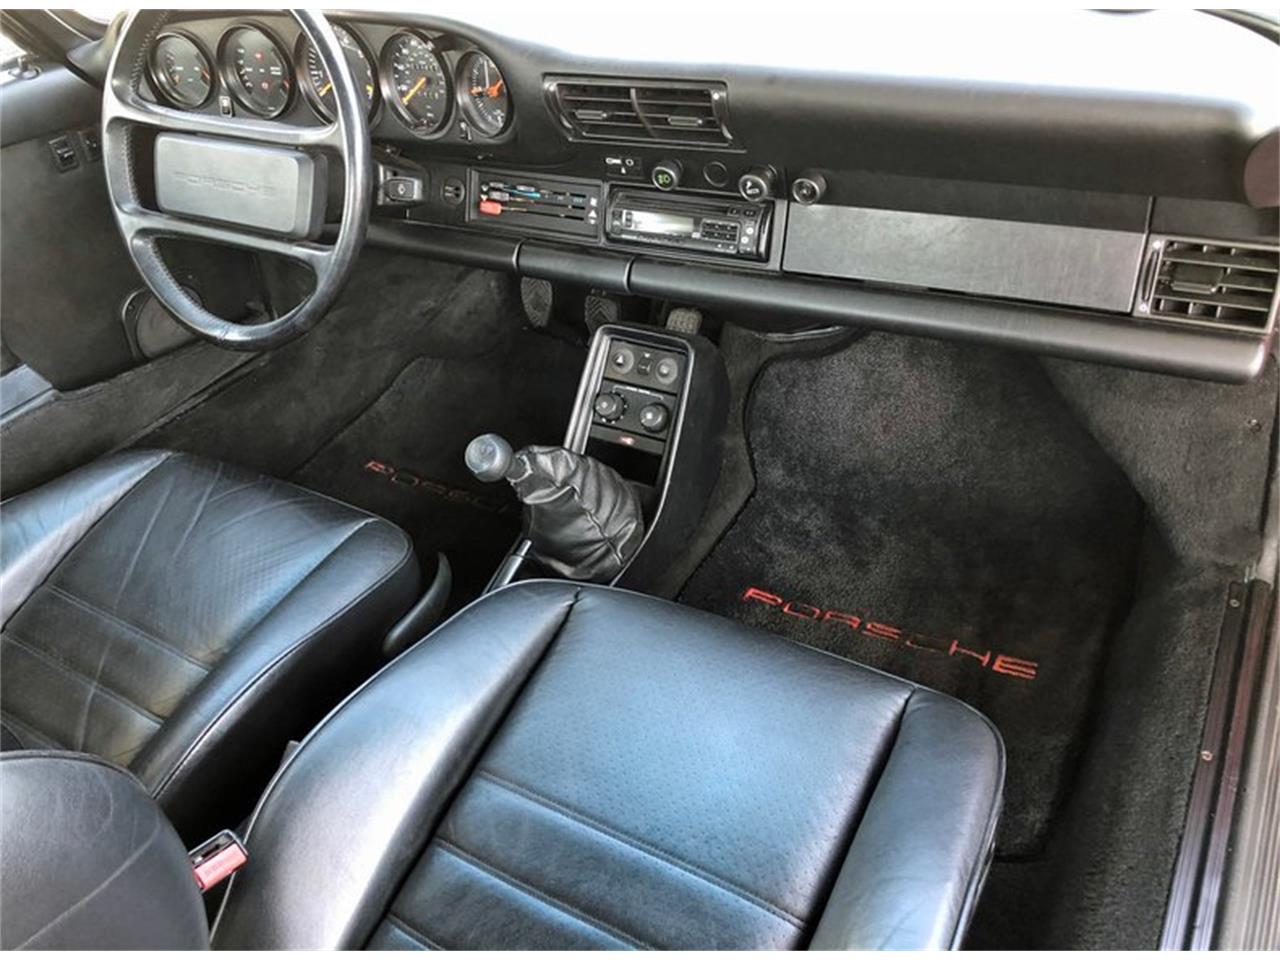 1986 Porsche 911 for sale in West Chester, PA – photo 63